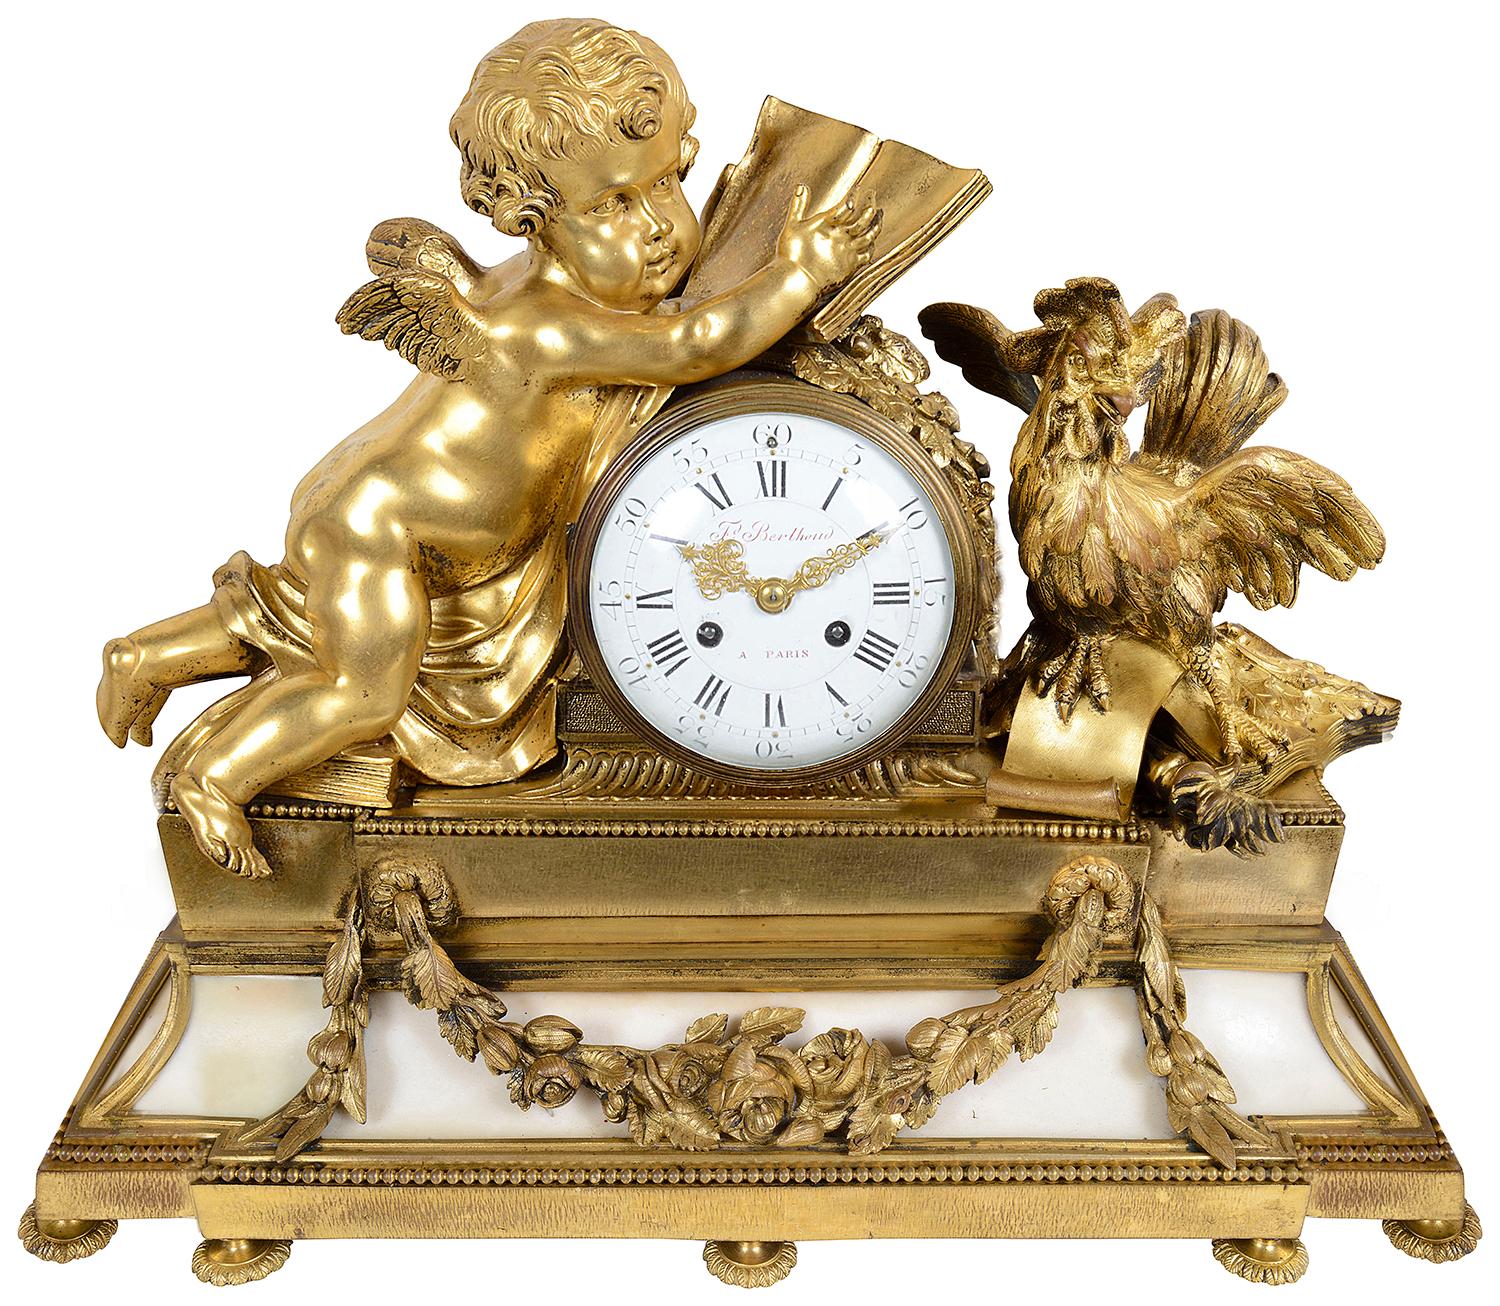 A very impressive and good quality 19th century gilded ormolu Louis XVI style clock garniture. The pair of five branch candelabra supported by a pair of classical semi clad females, raised on white marble bases with garlands of flowers.
The clock